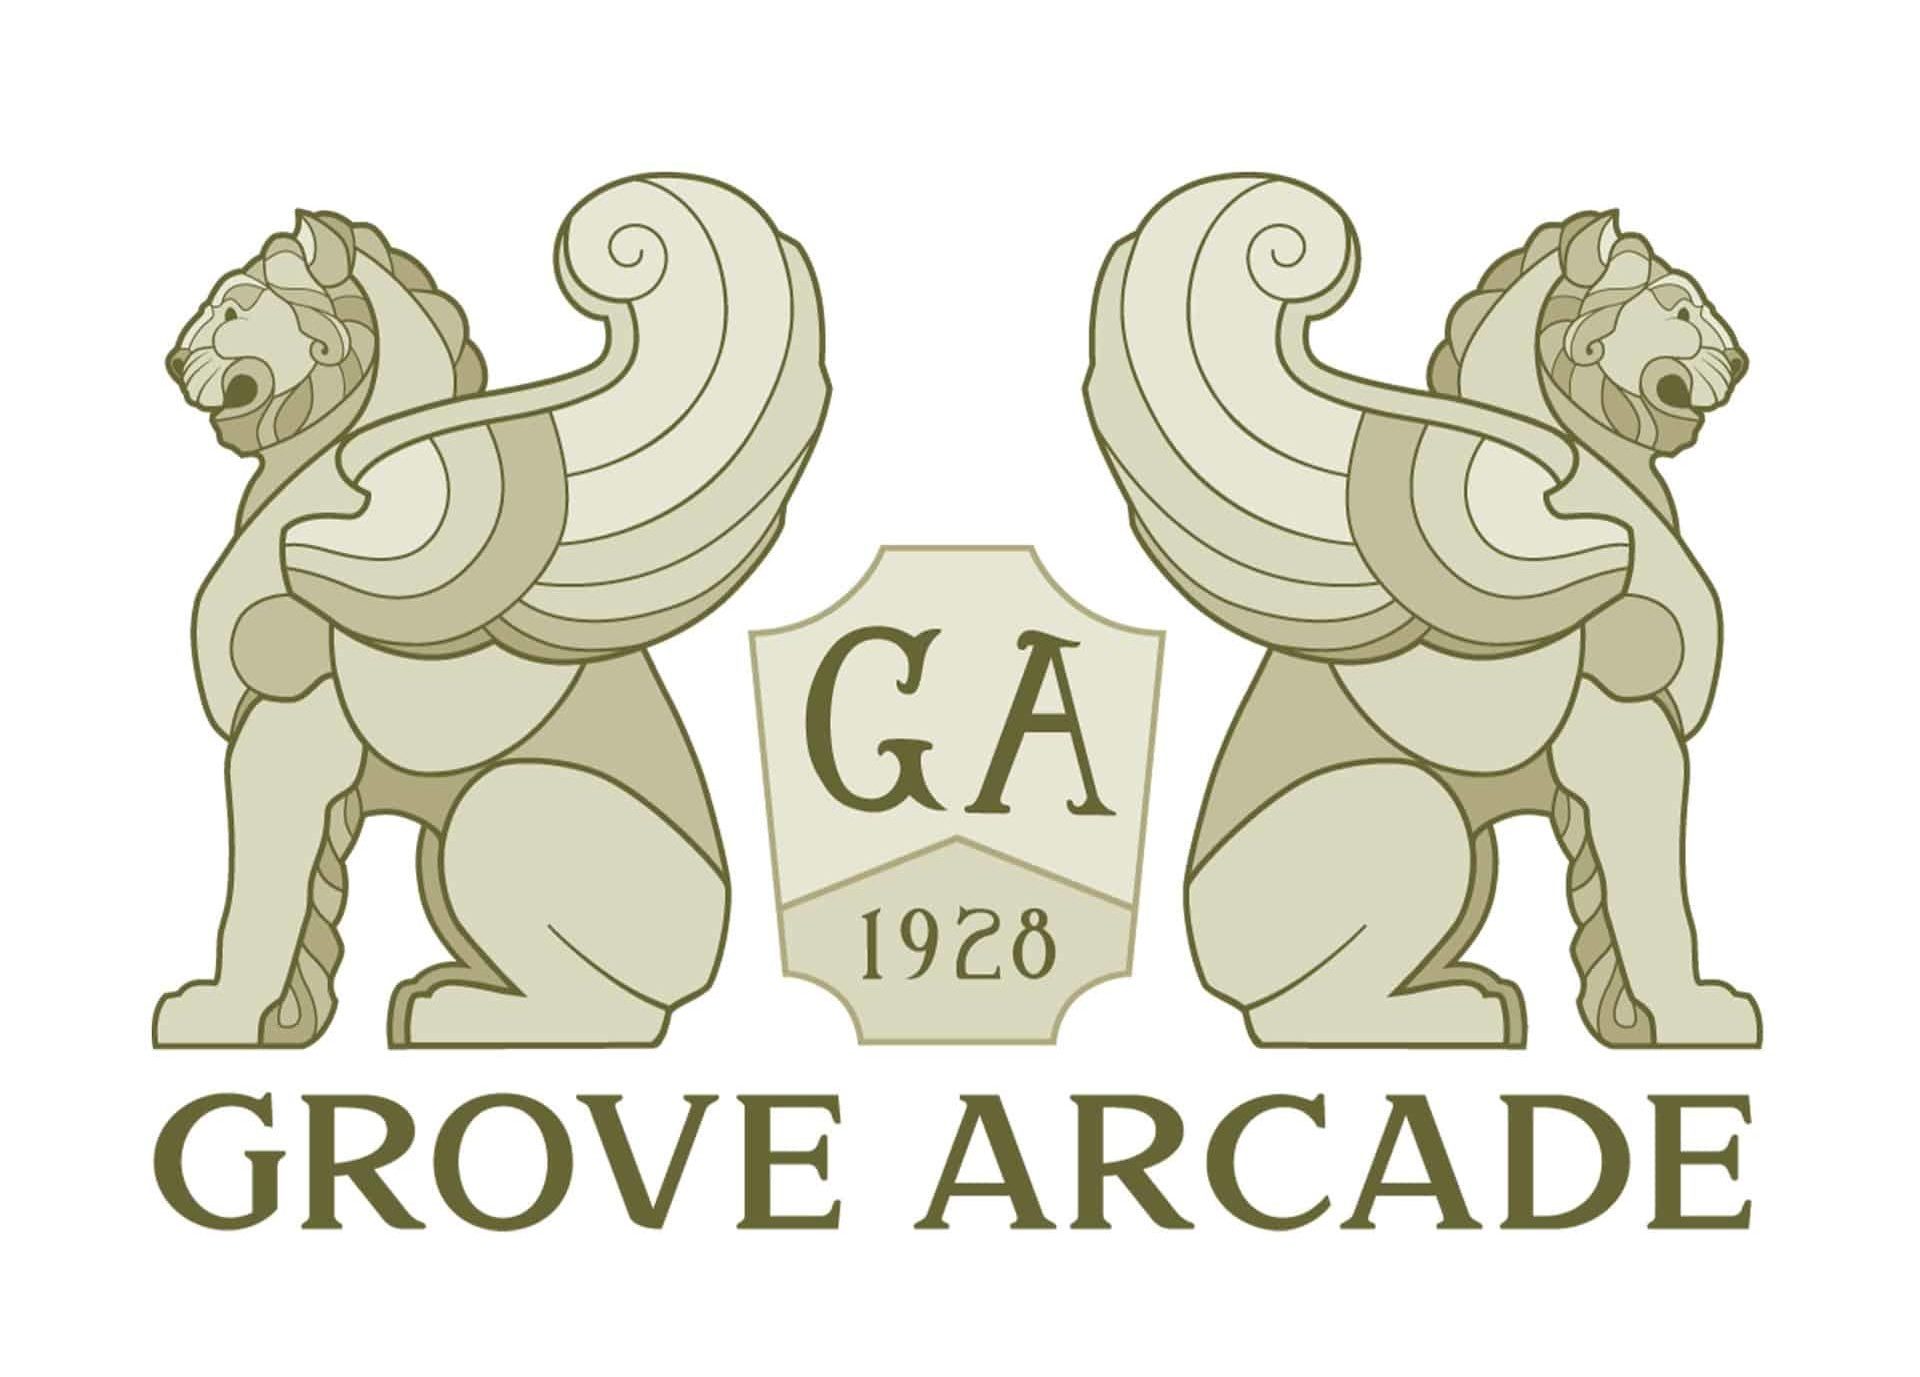 winged lion statues on each side of the grove arcade shield with "grove arcade" underneath